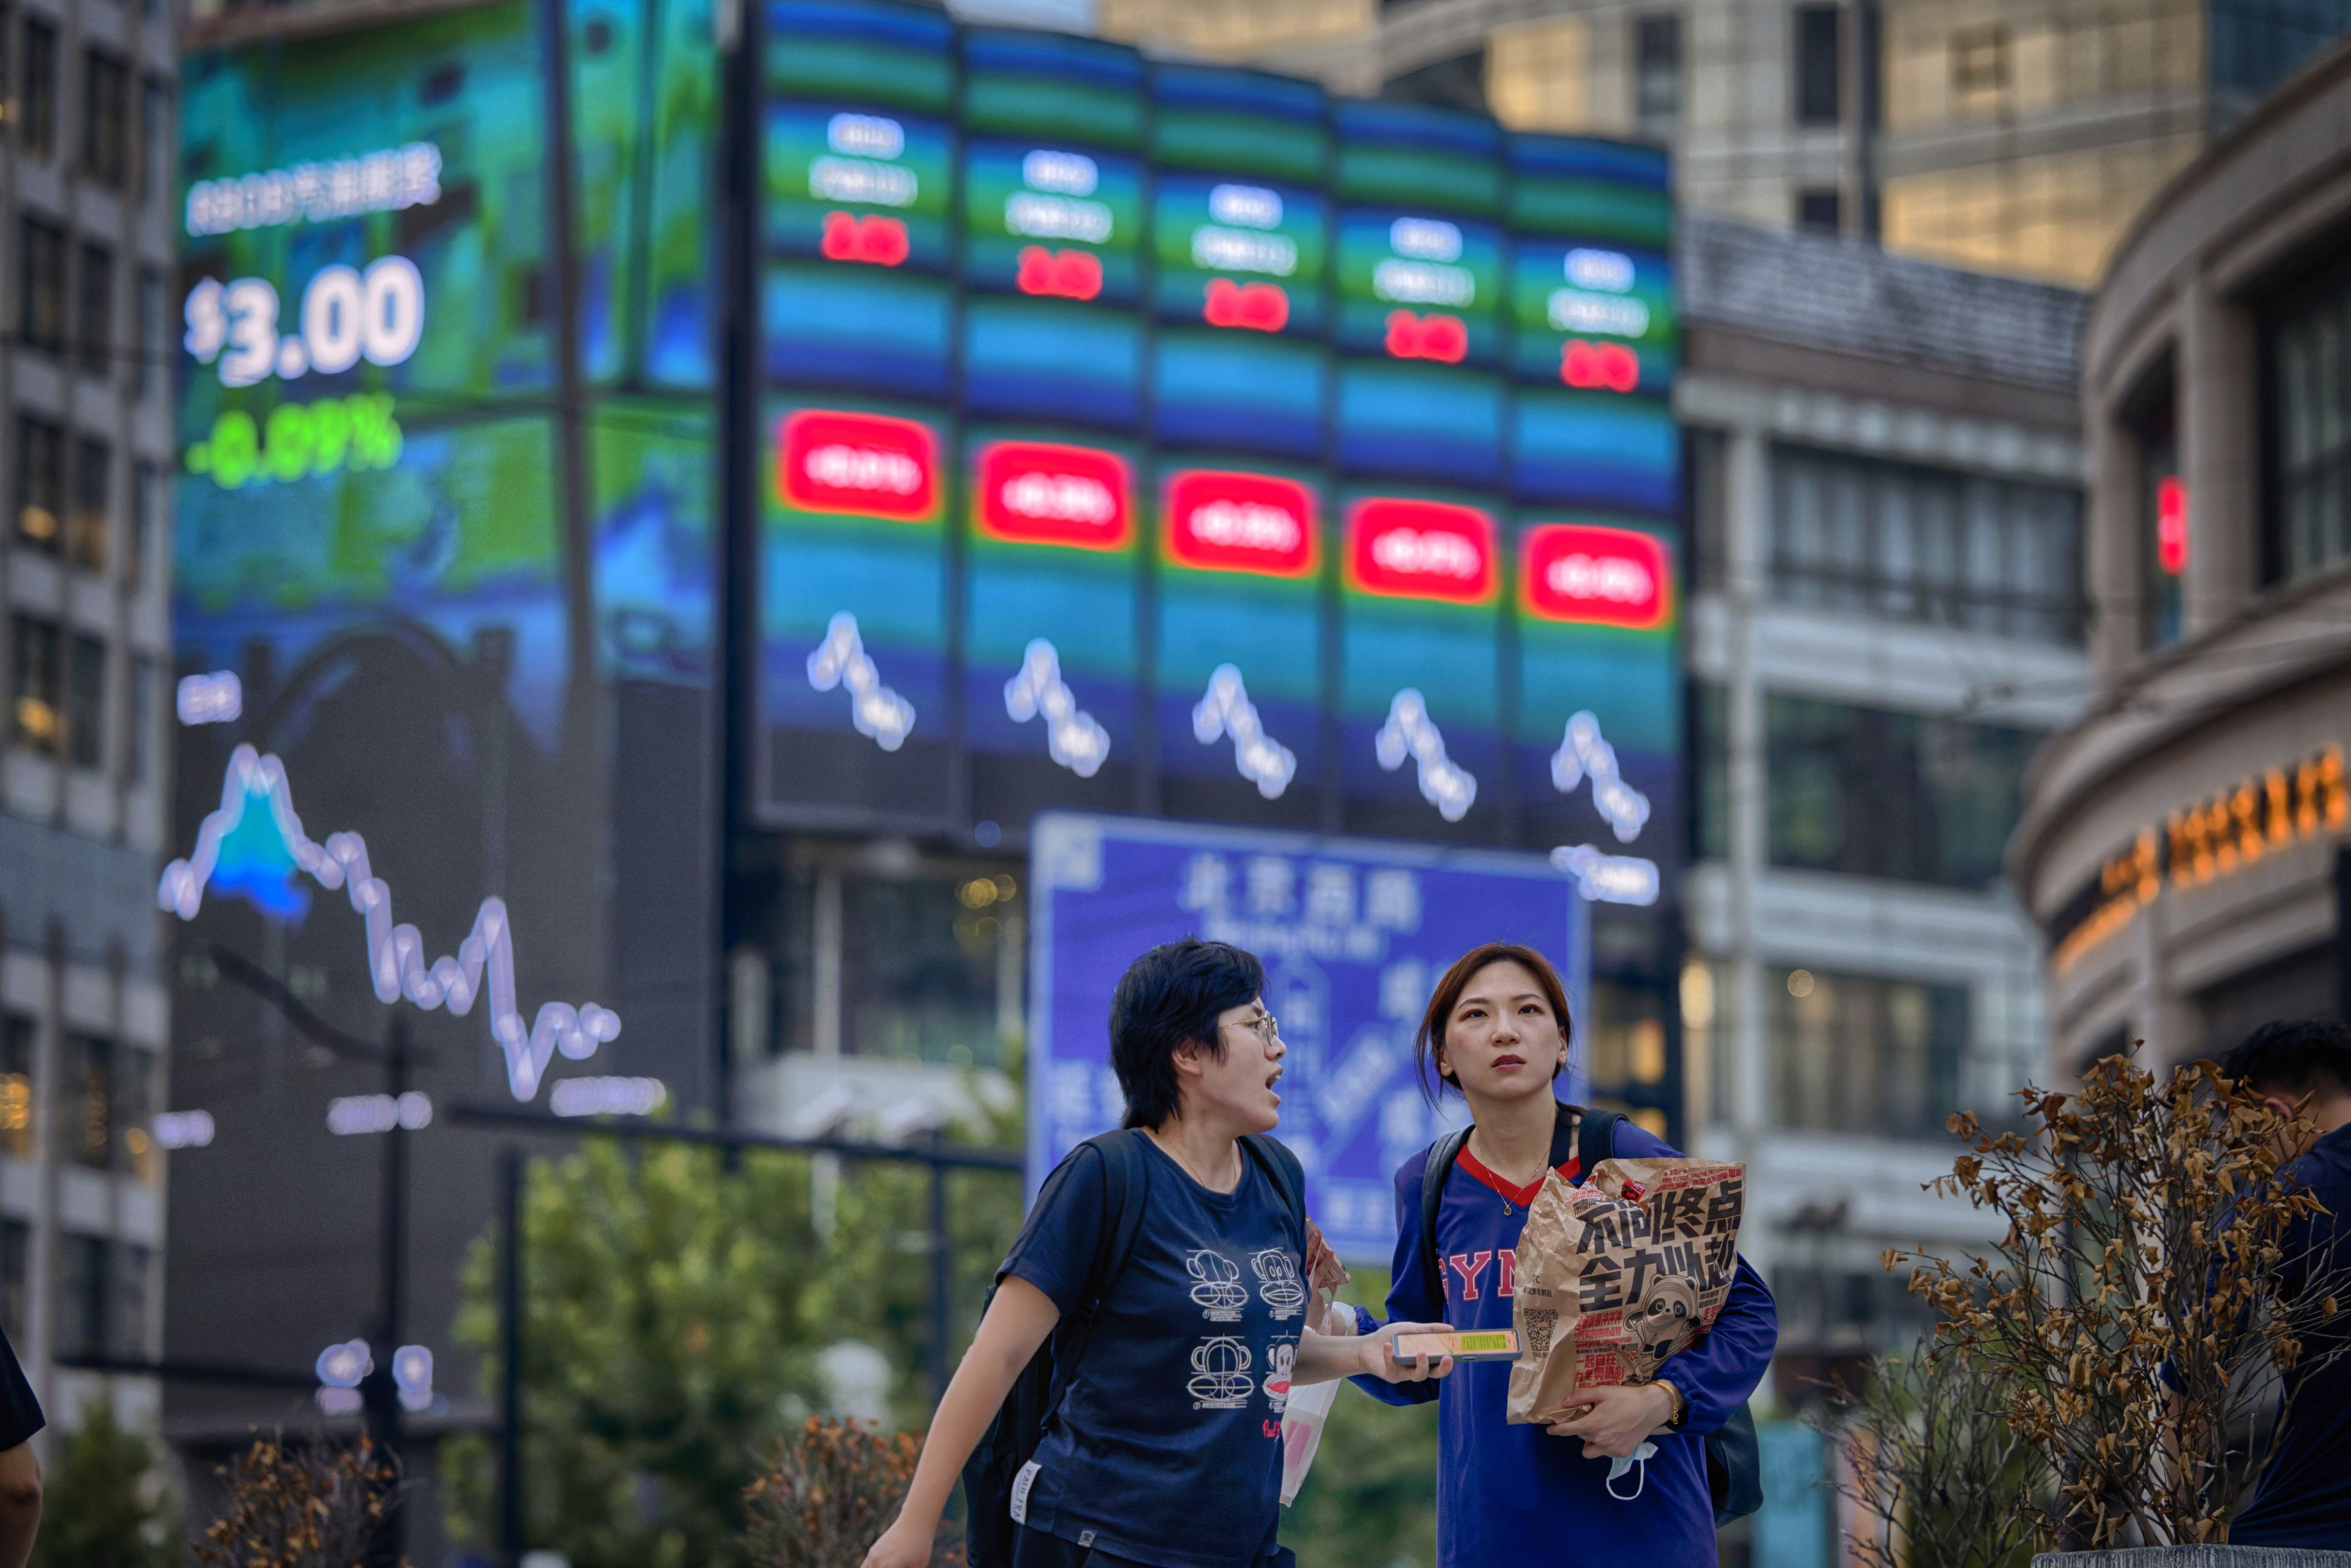 People walk in front of the large screen showing the latest stock exchange data in Shanghai on August 22. Photo: EPA-EFE